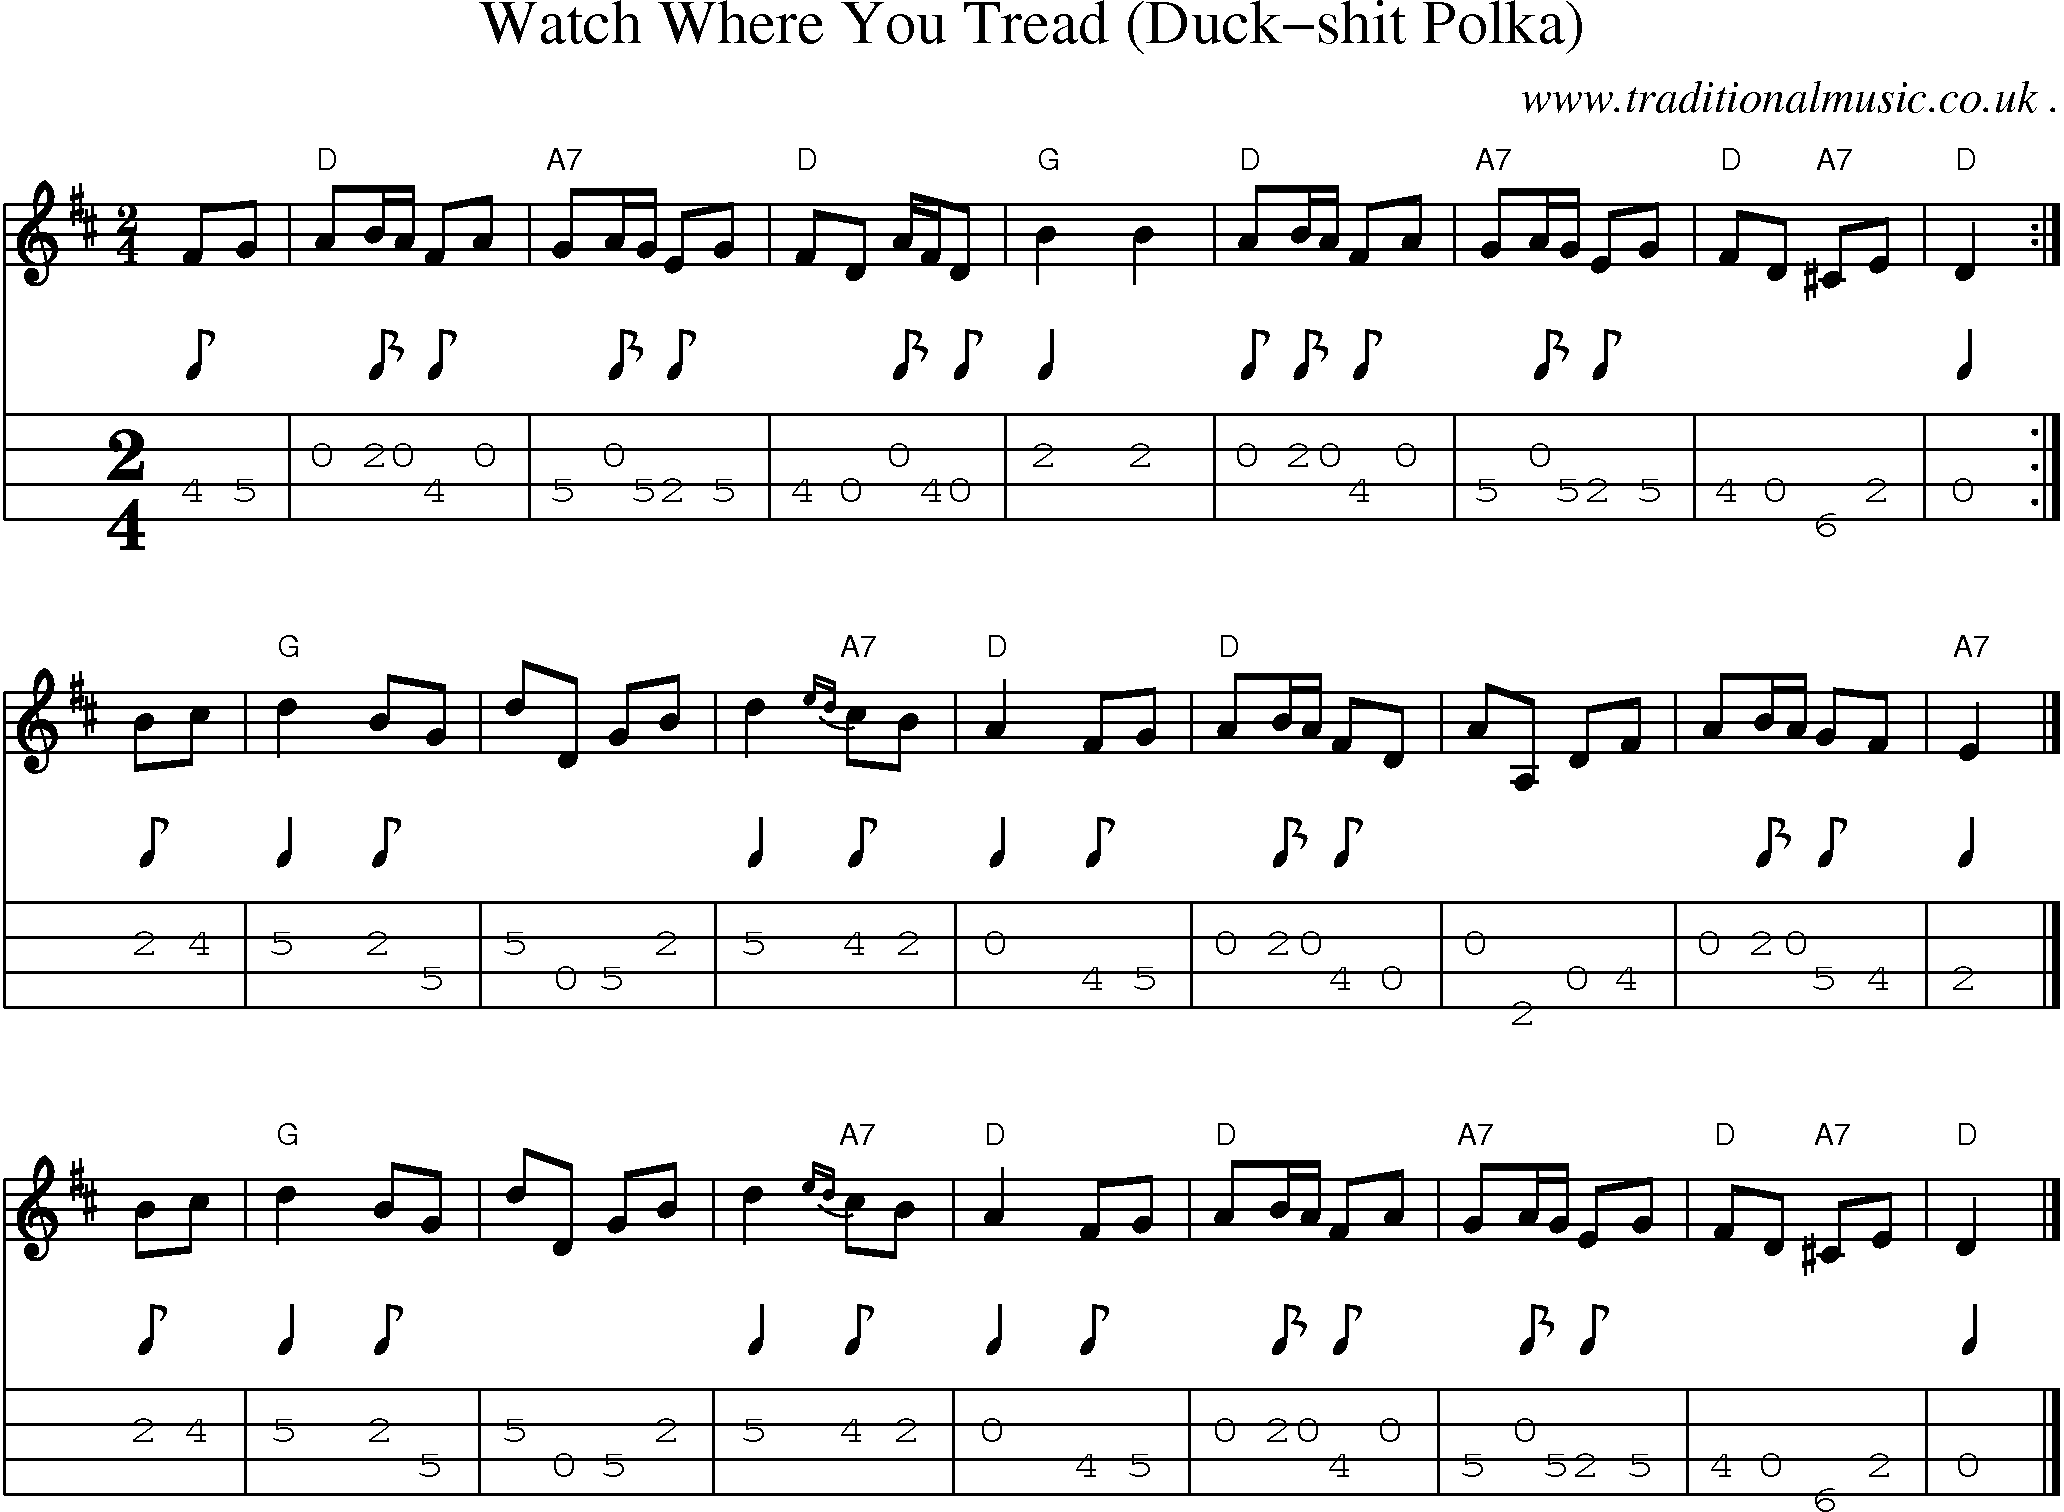 Sheet-music  score, Chords and Mandolin Tabs for Watch Where You Tread Duck-shit Polka